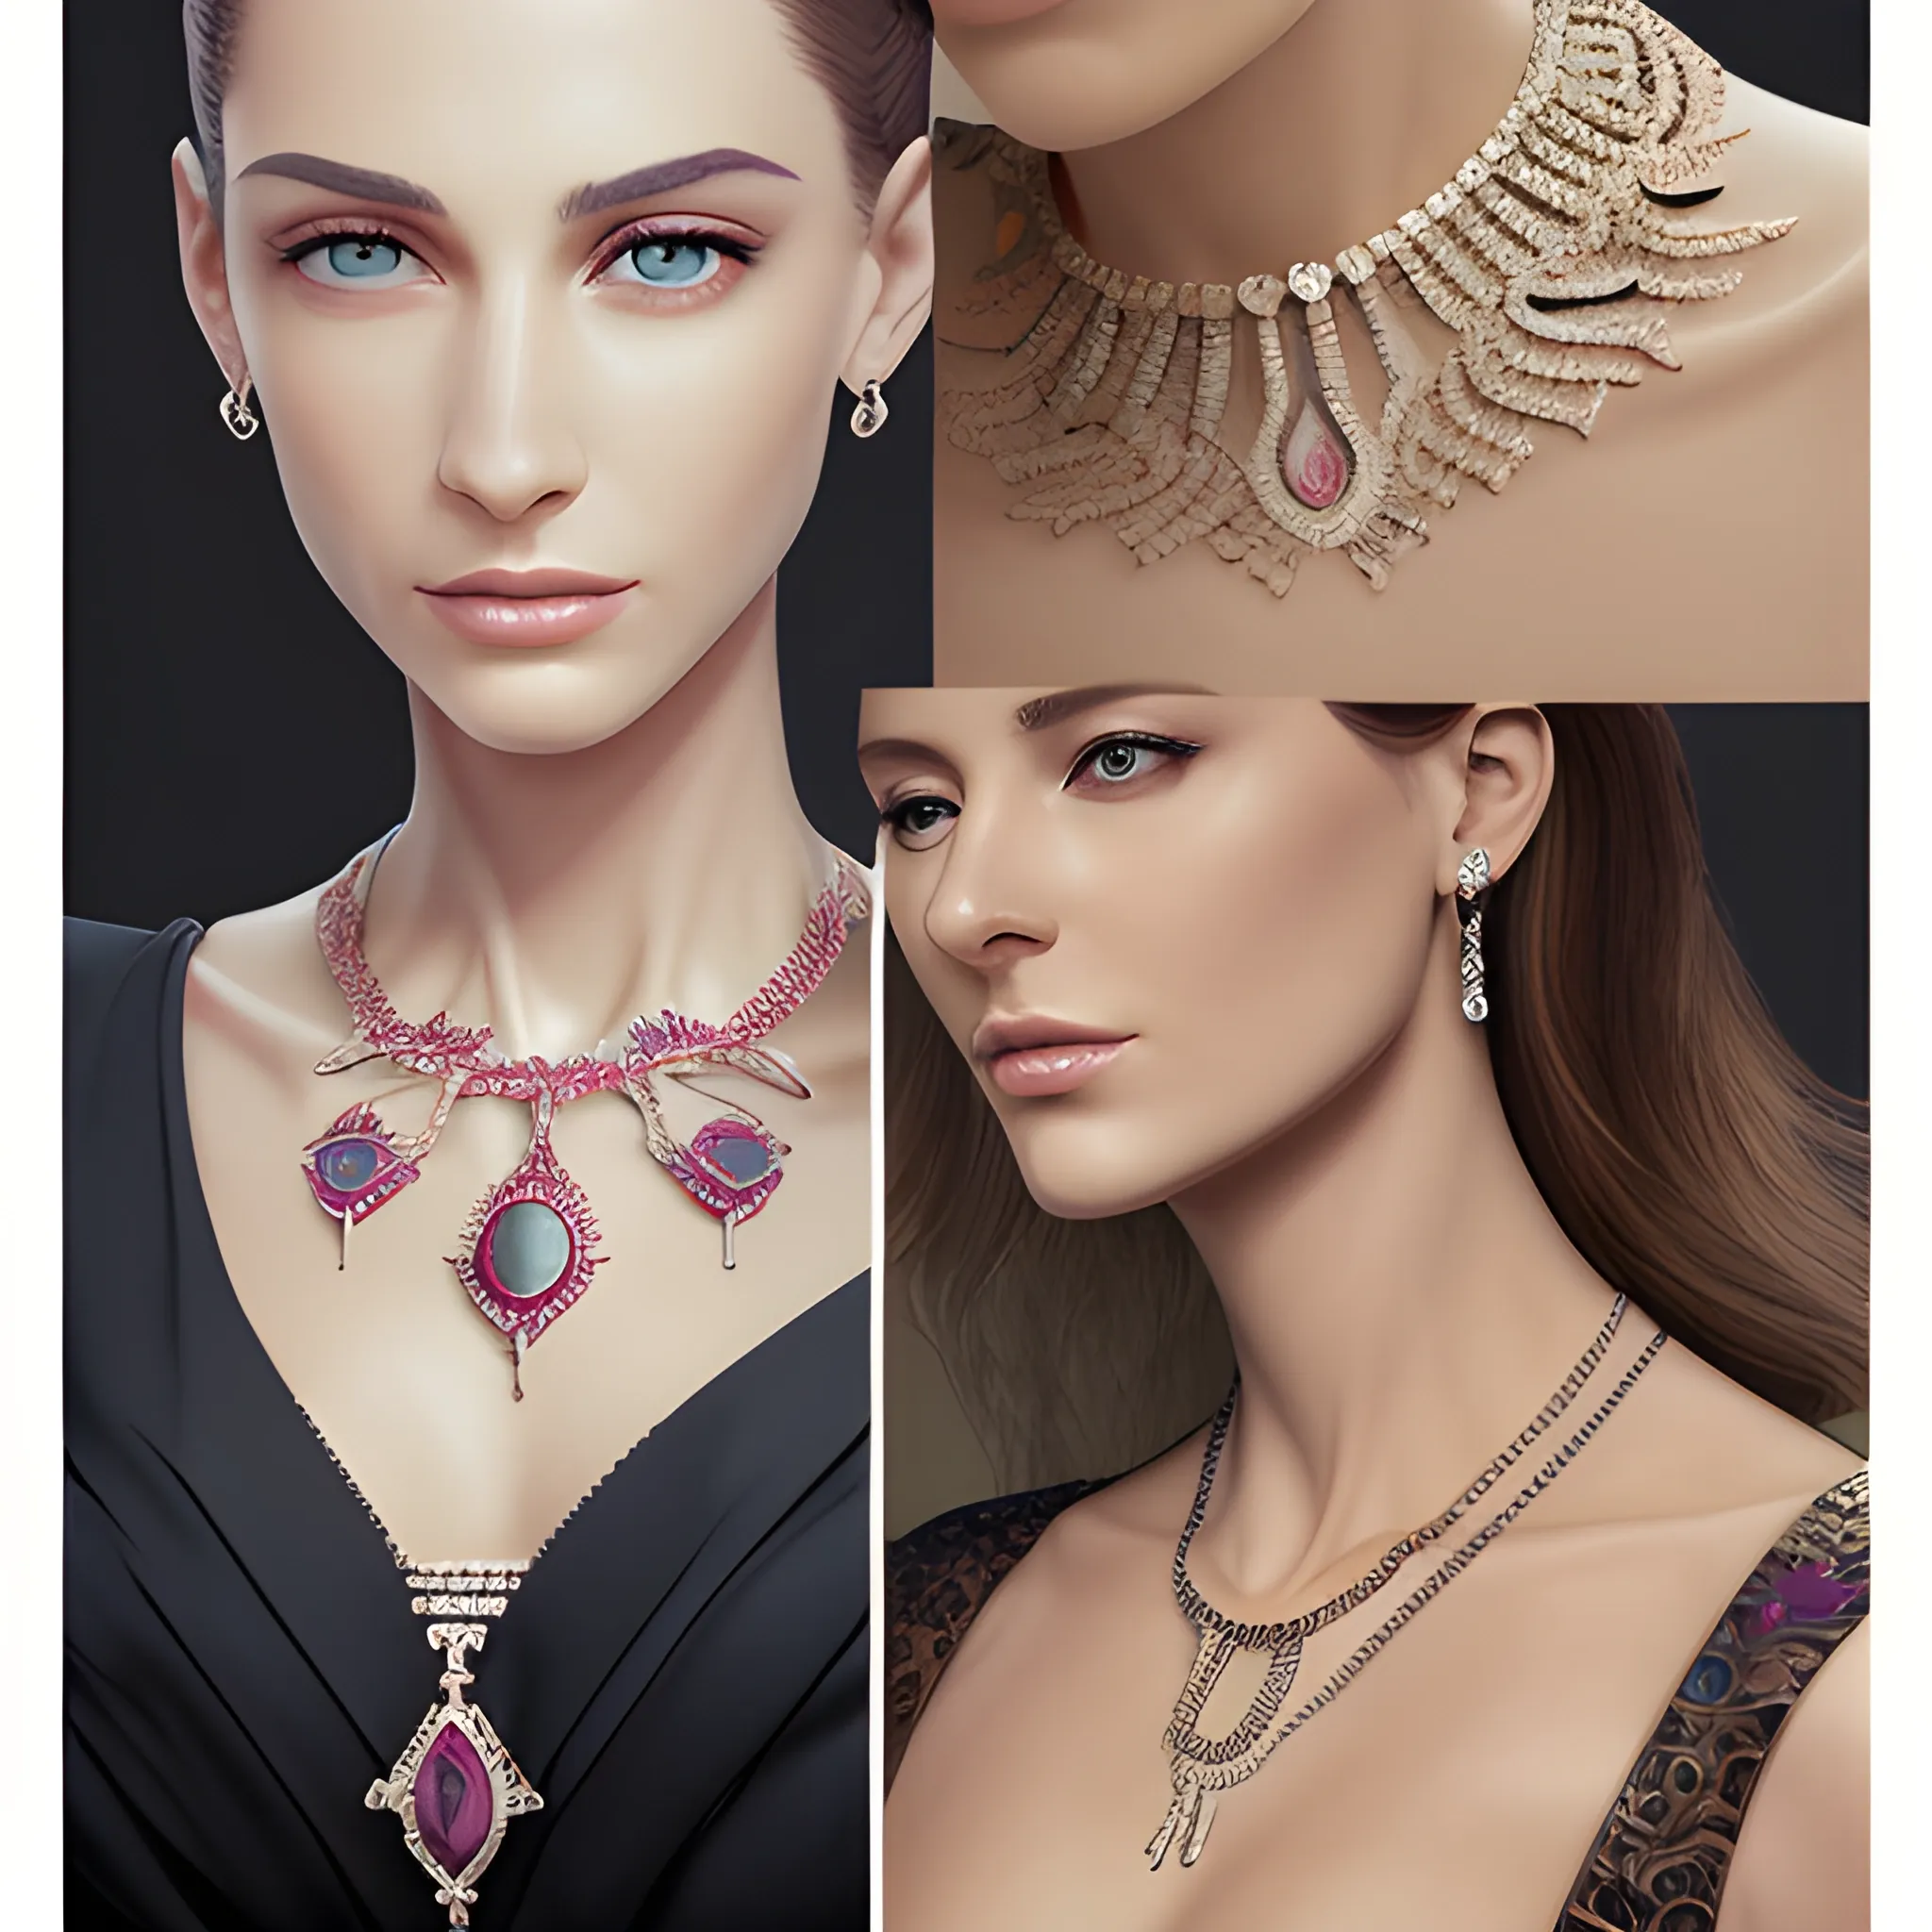 A reference. Advertising of jewelry. The designer's portfolio. Photorealism